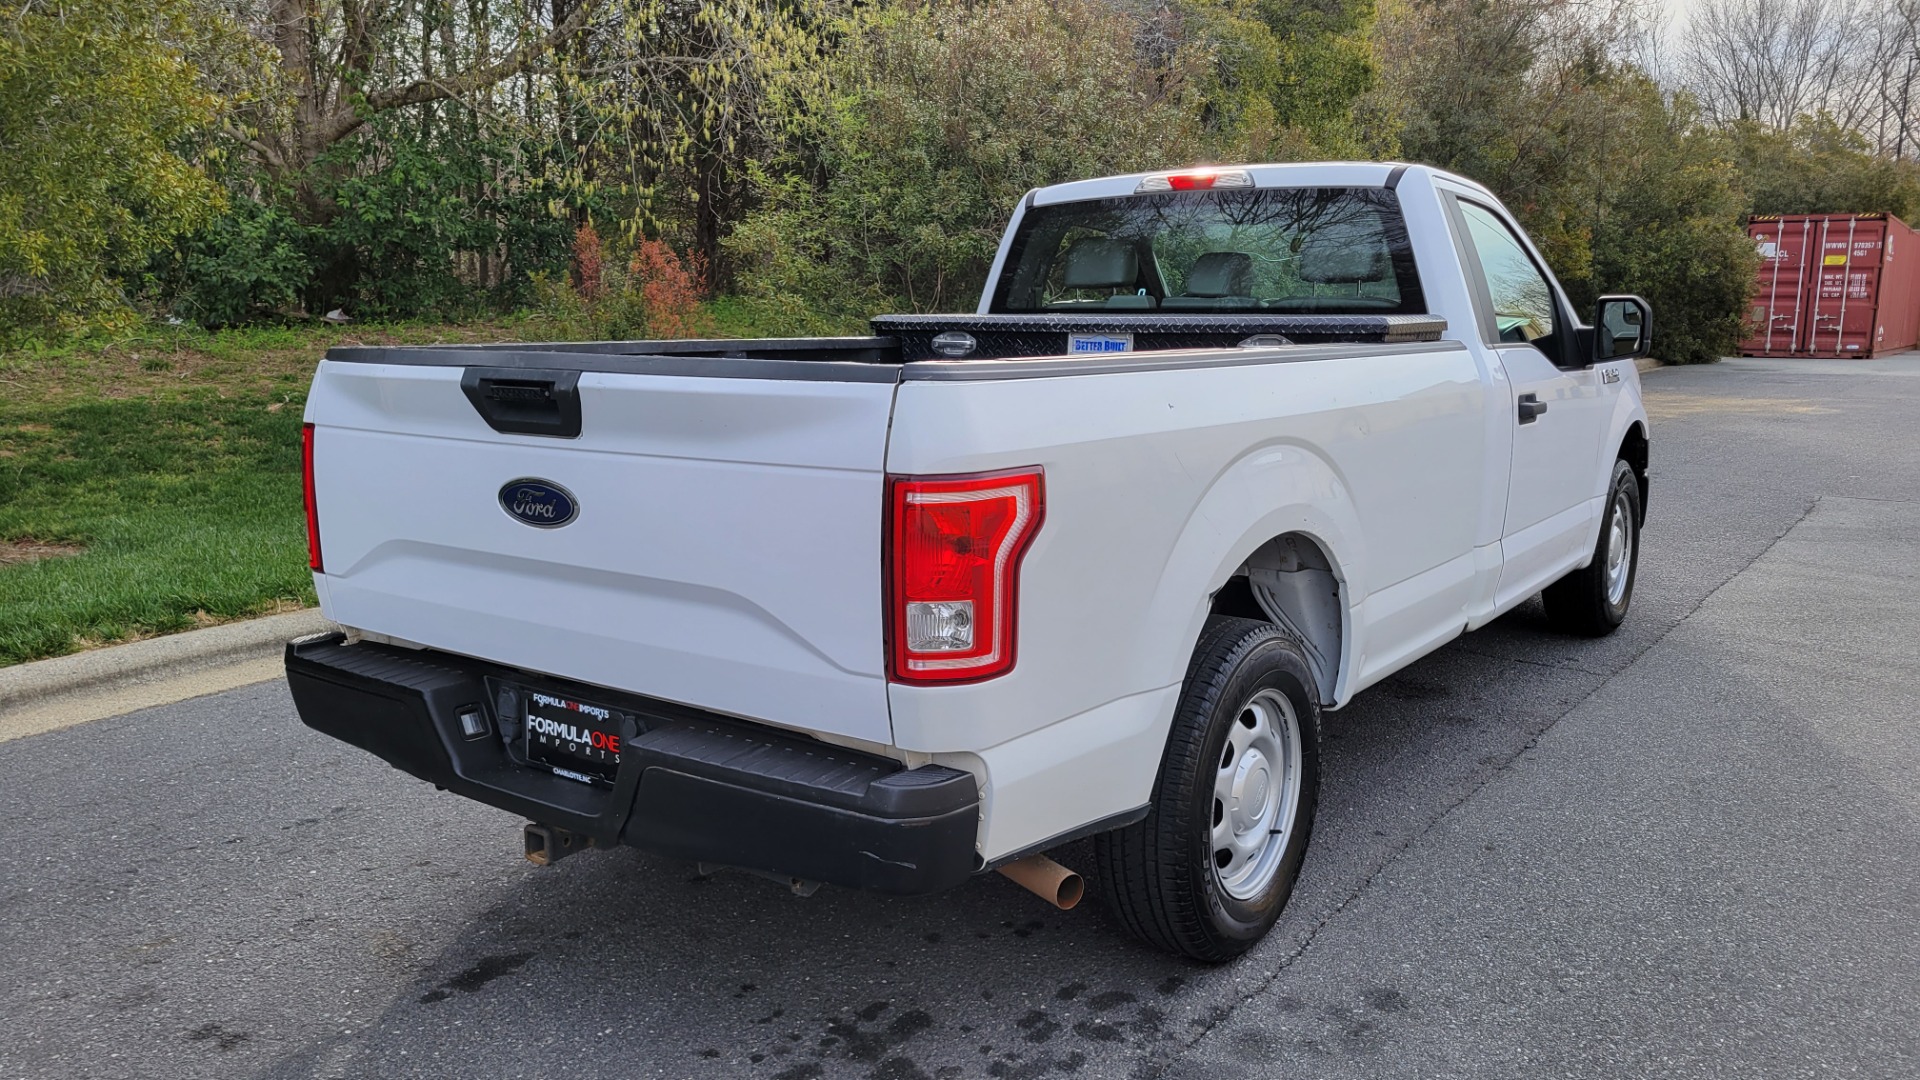 Used 2016 Ford F-150 XL REGULAR CAB 4X2 / 3.5L V6 / 6-SPD AUTO / TOWING / TOOL BOX for sale Sold at Formula Imports in Charlotte NC 28227 6